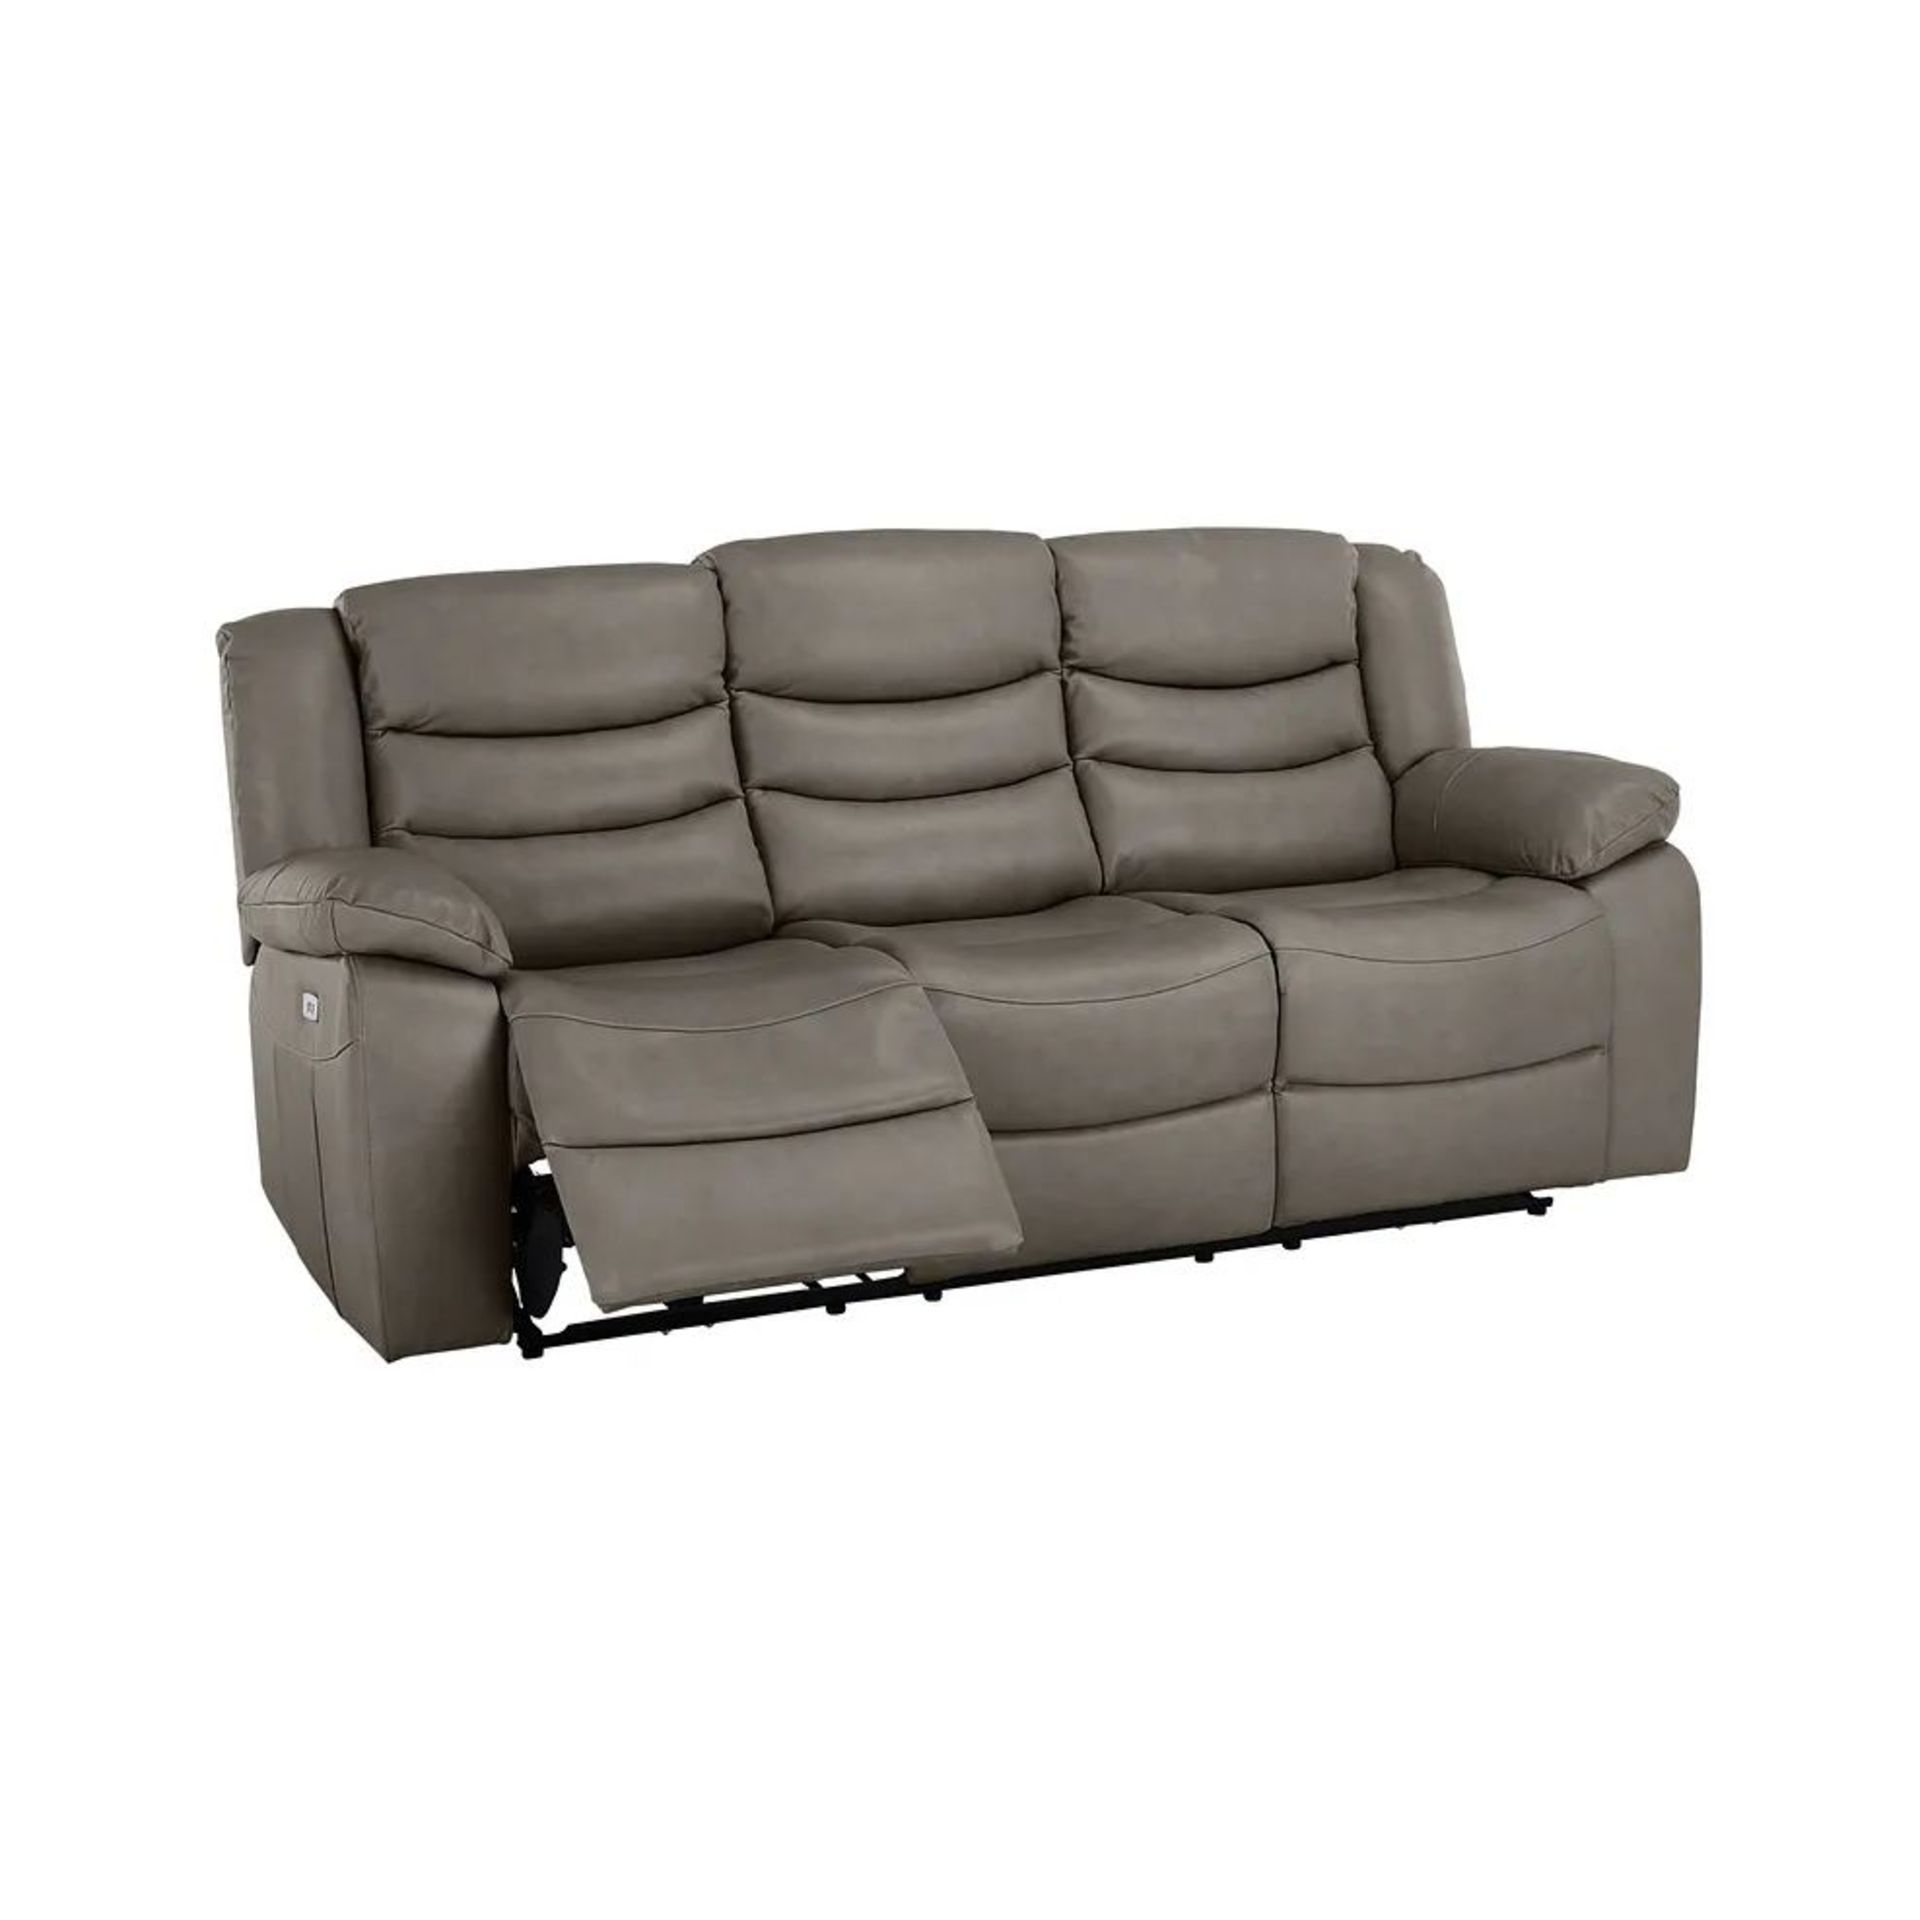 BRAND NEW MARLOW 3 Seater Electric Recliner Sofa - DARK GREY LEATHER. RRP £1849. Our Marlow - Image 3 of 11